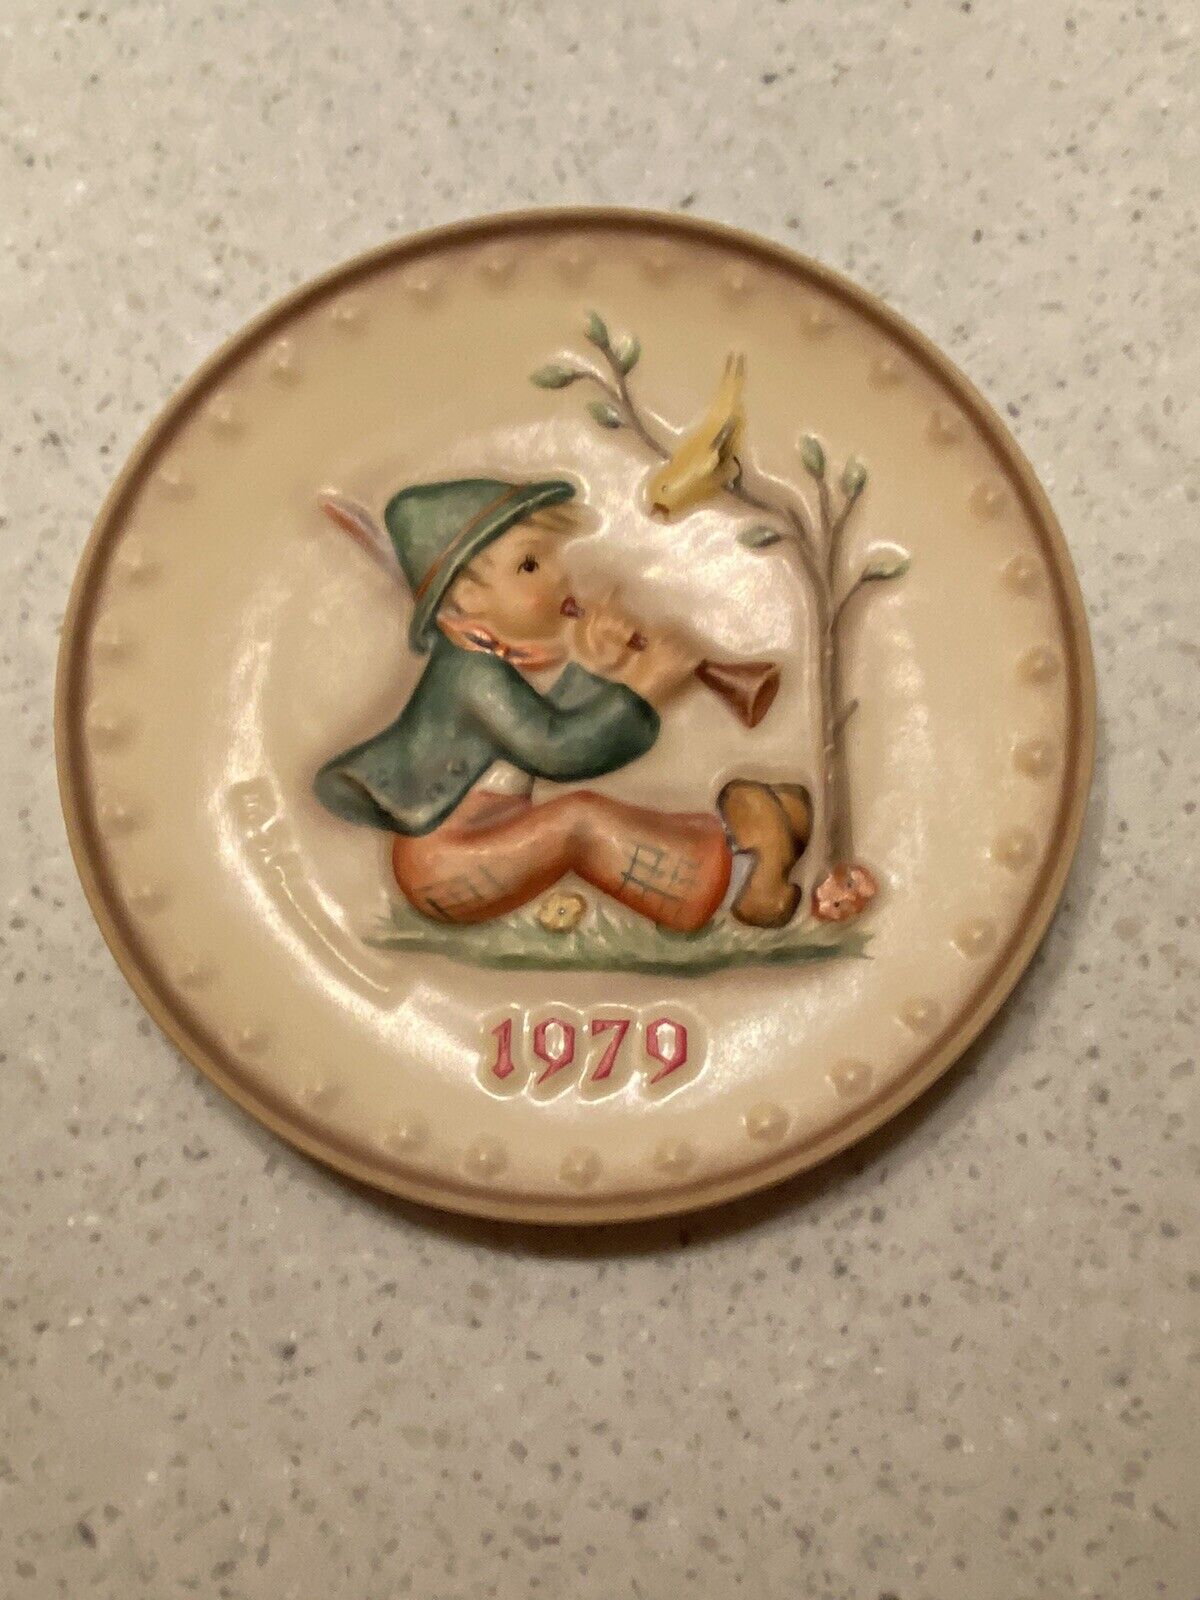 Hummel 1979 Annual Plate Boy Singing Lessons 272 Goebel Germany 7.5 Inches